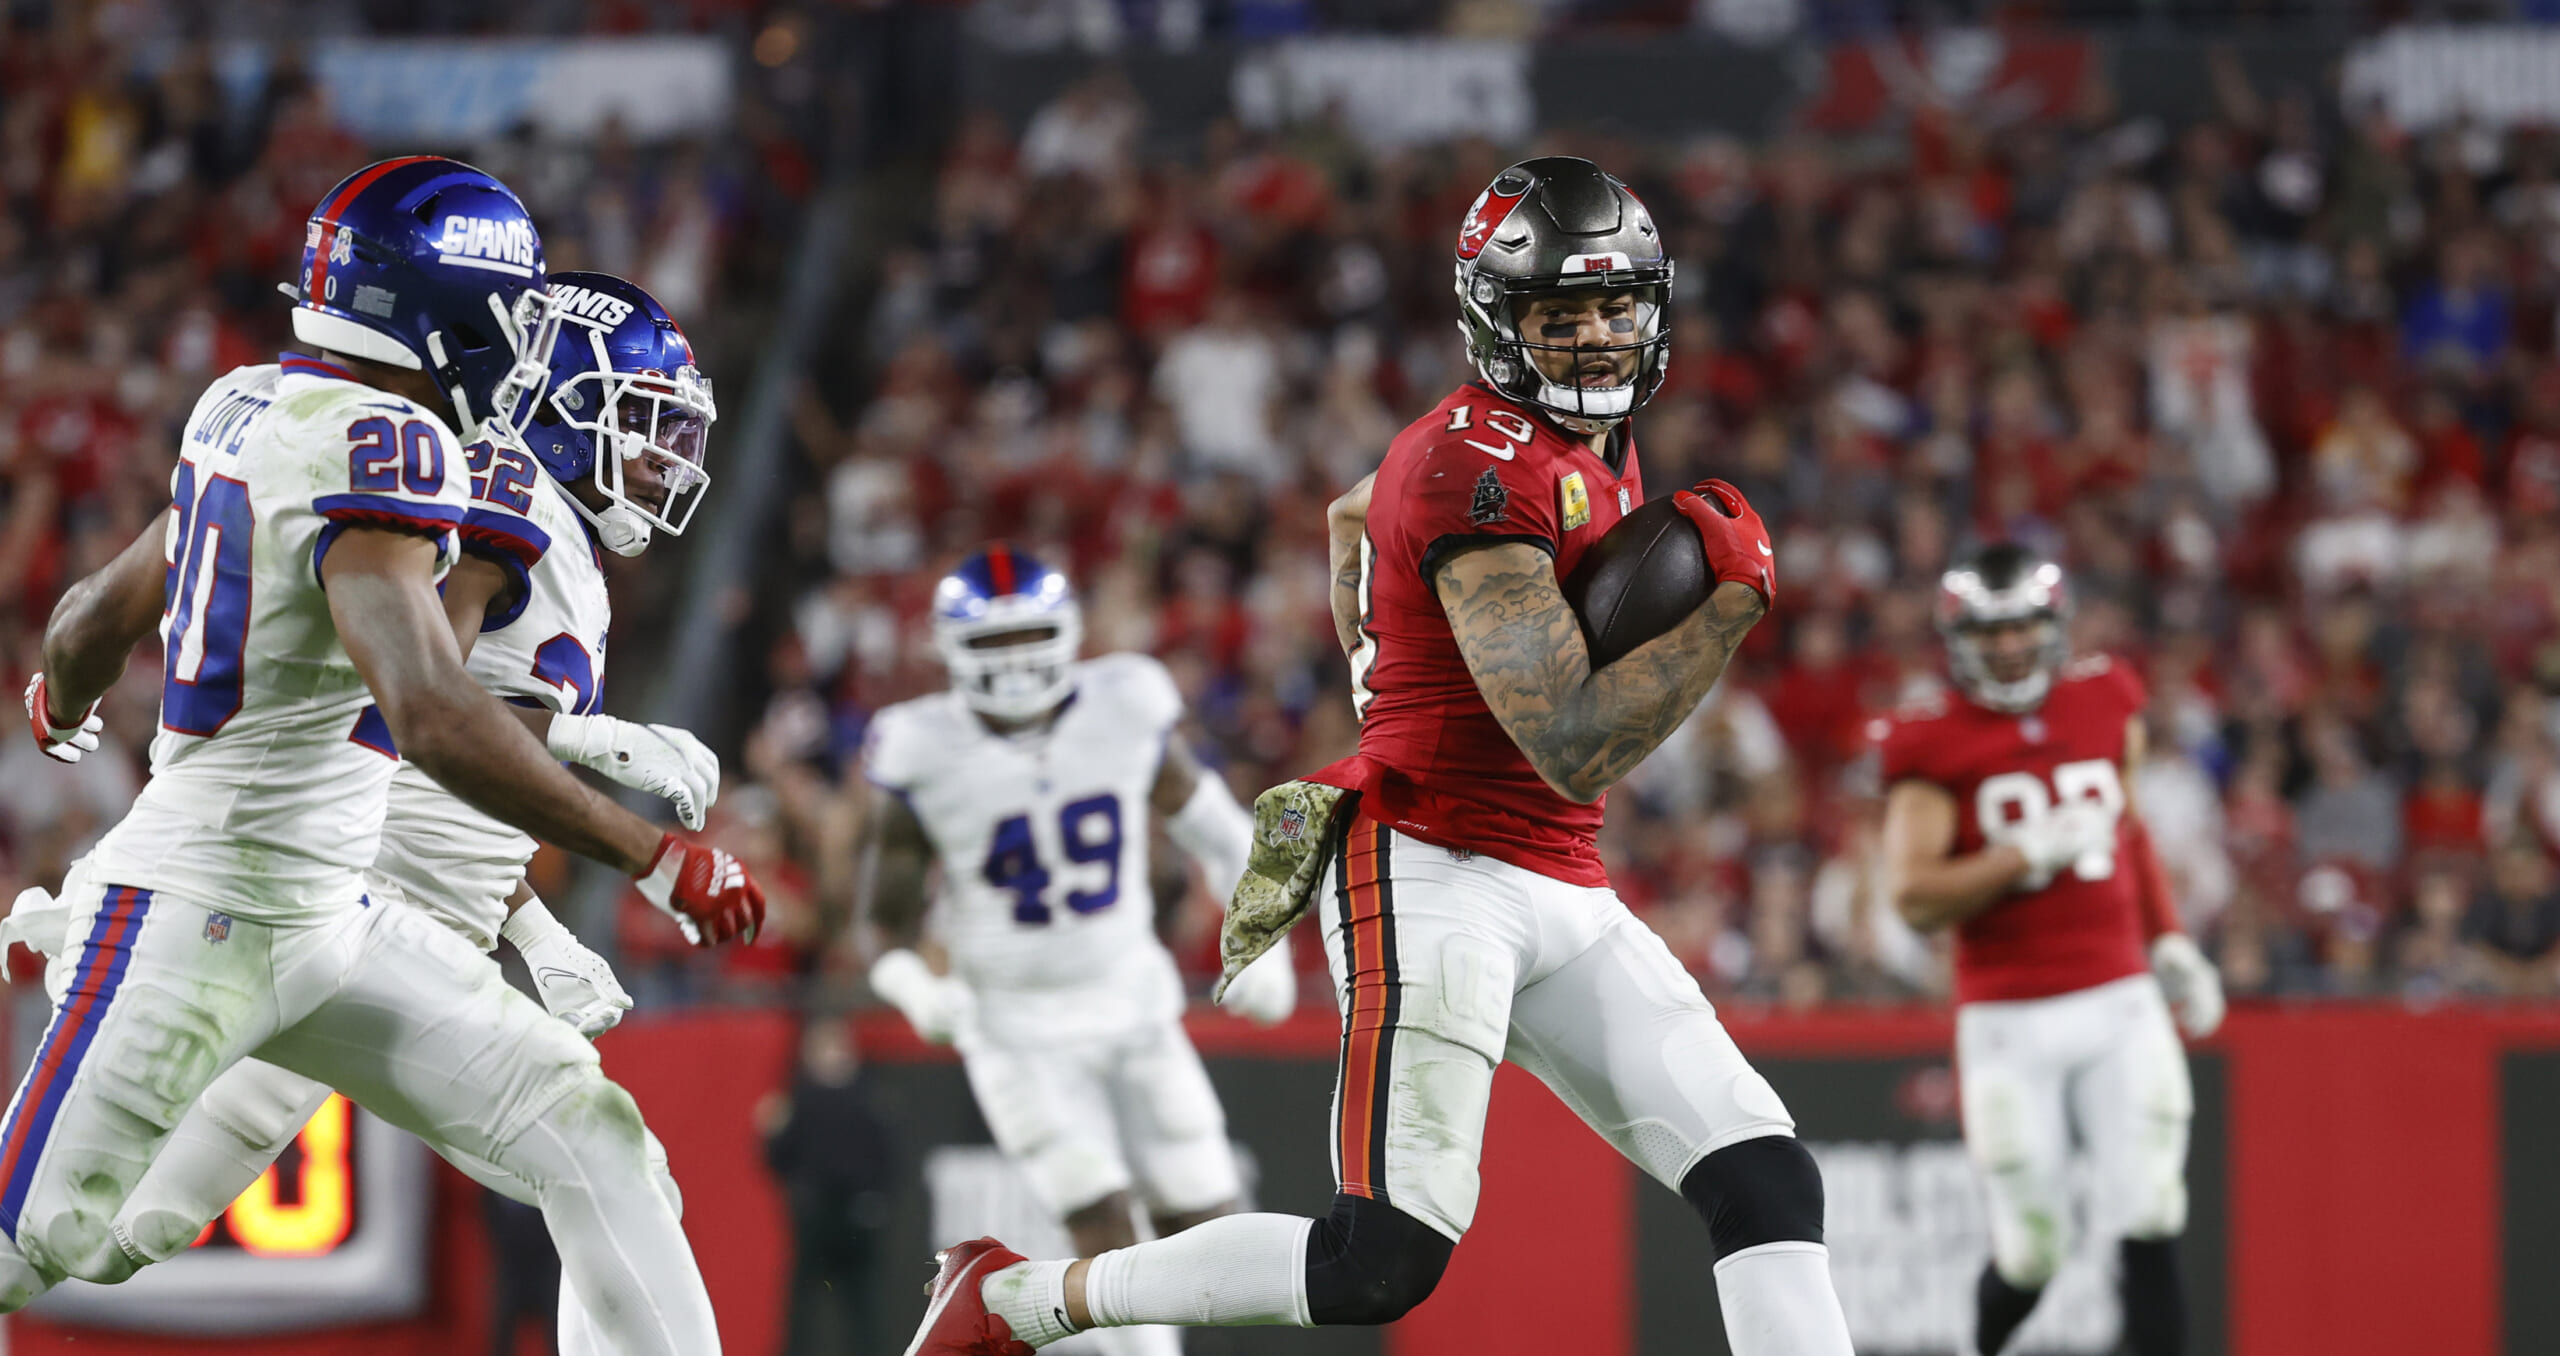 Tampa Bay Buccaneers wide receiver Mike Evans (13) runs with the ball against the New York Giants during the second half at Raymond James Stadium